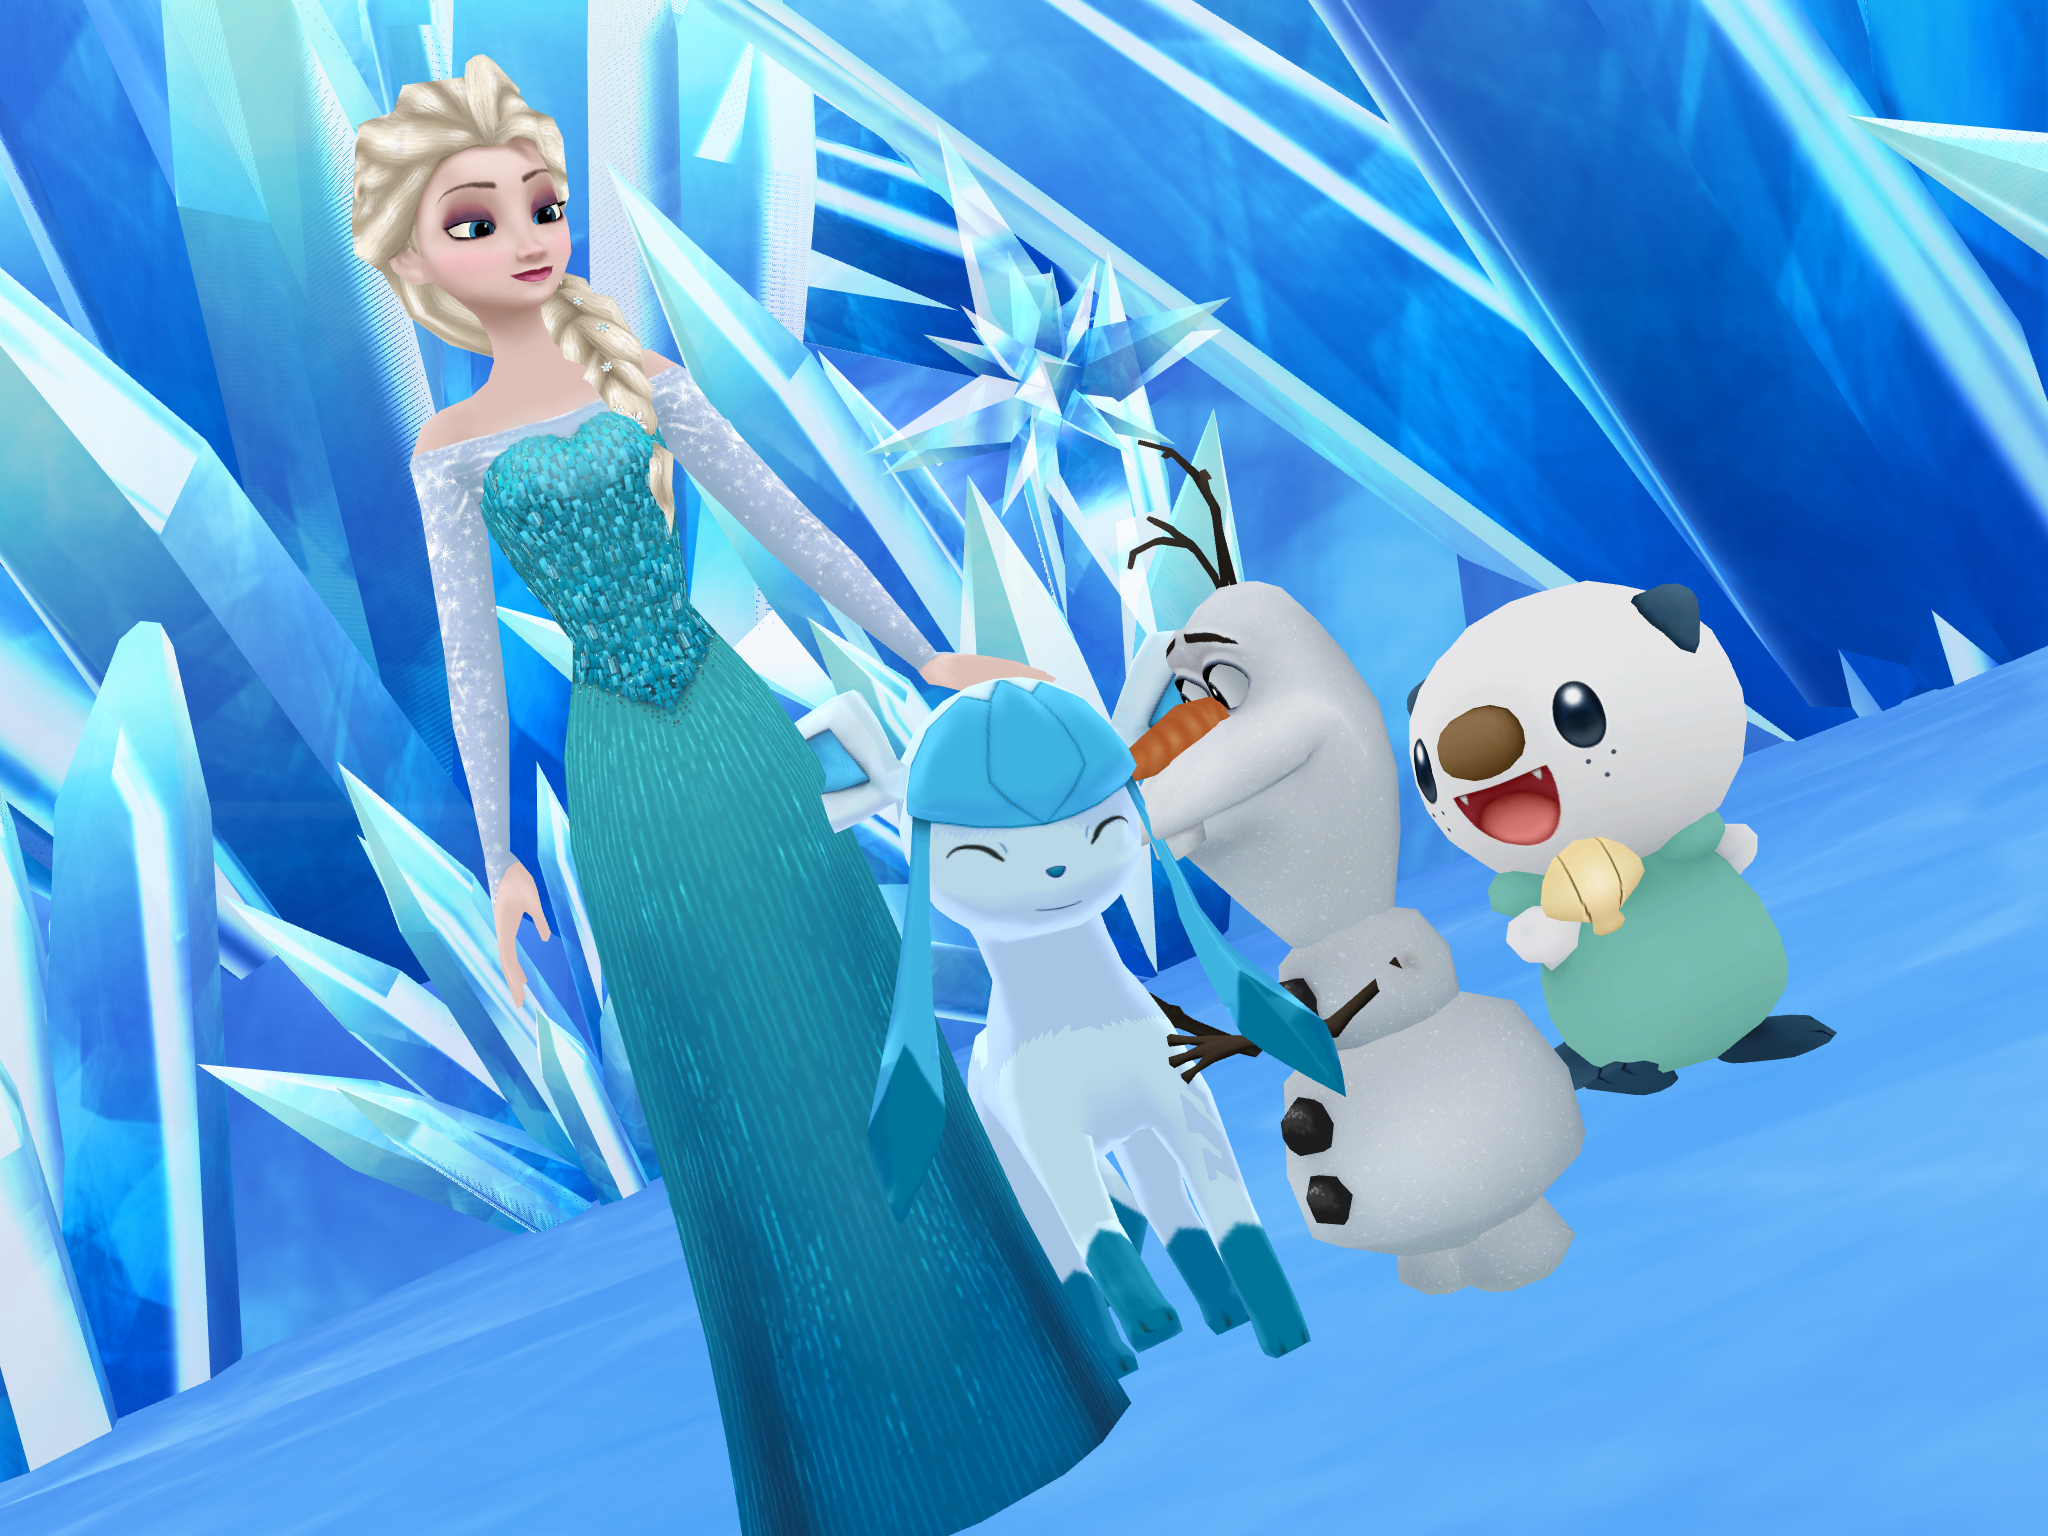 Mmd Frozen Pkmn Lovely Glaceon By Jackfrostoverland